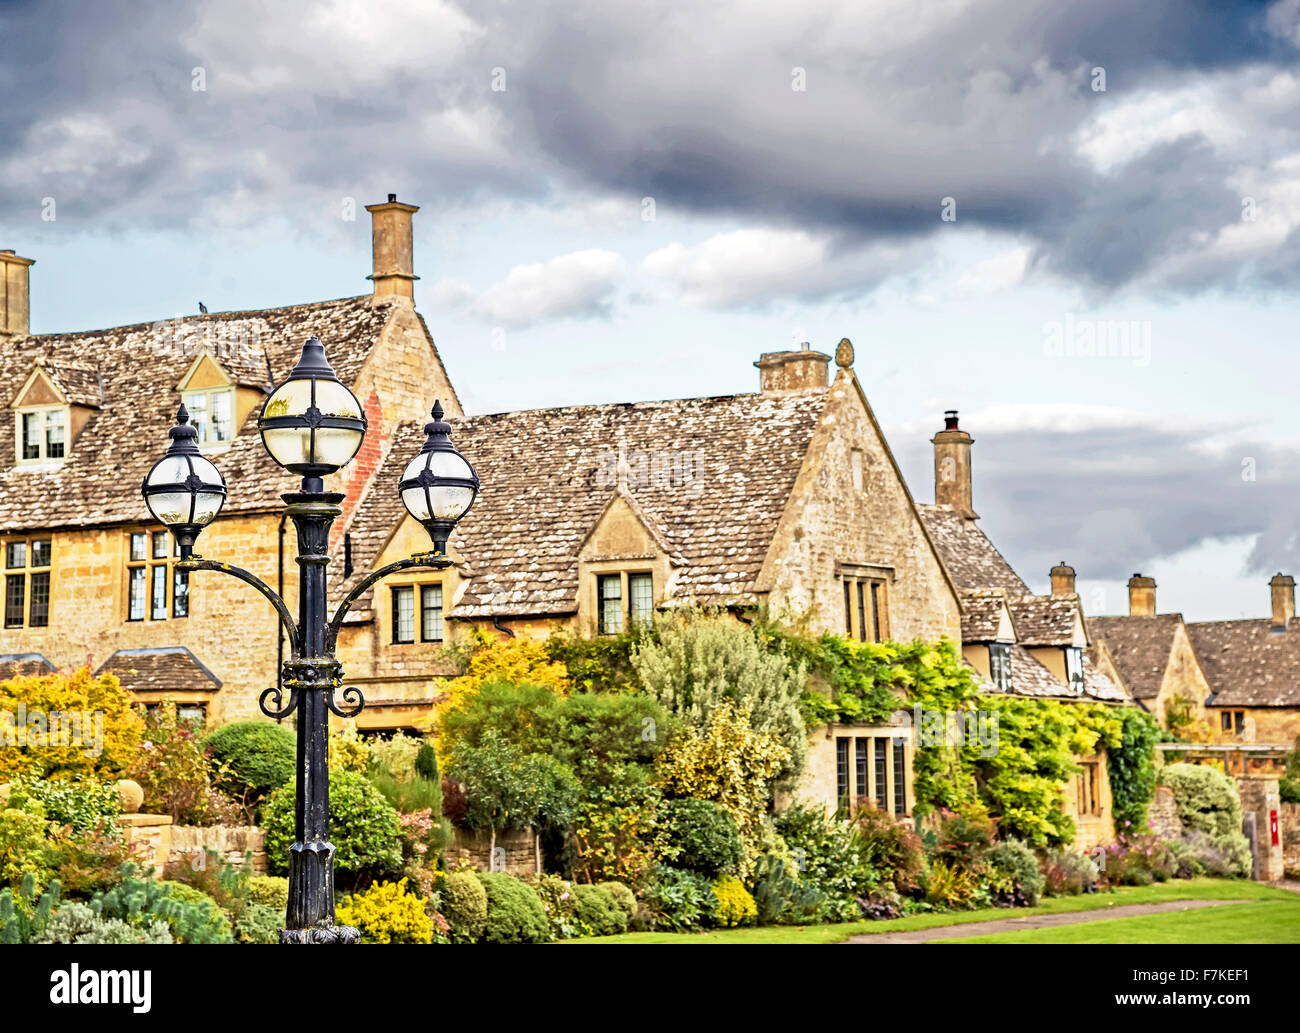 Thatched Cottage in the Cotswolds; Reetgedecktes Cottage in den Cotswolds Stock Photo